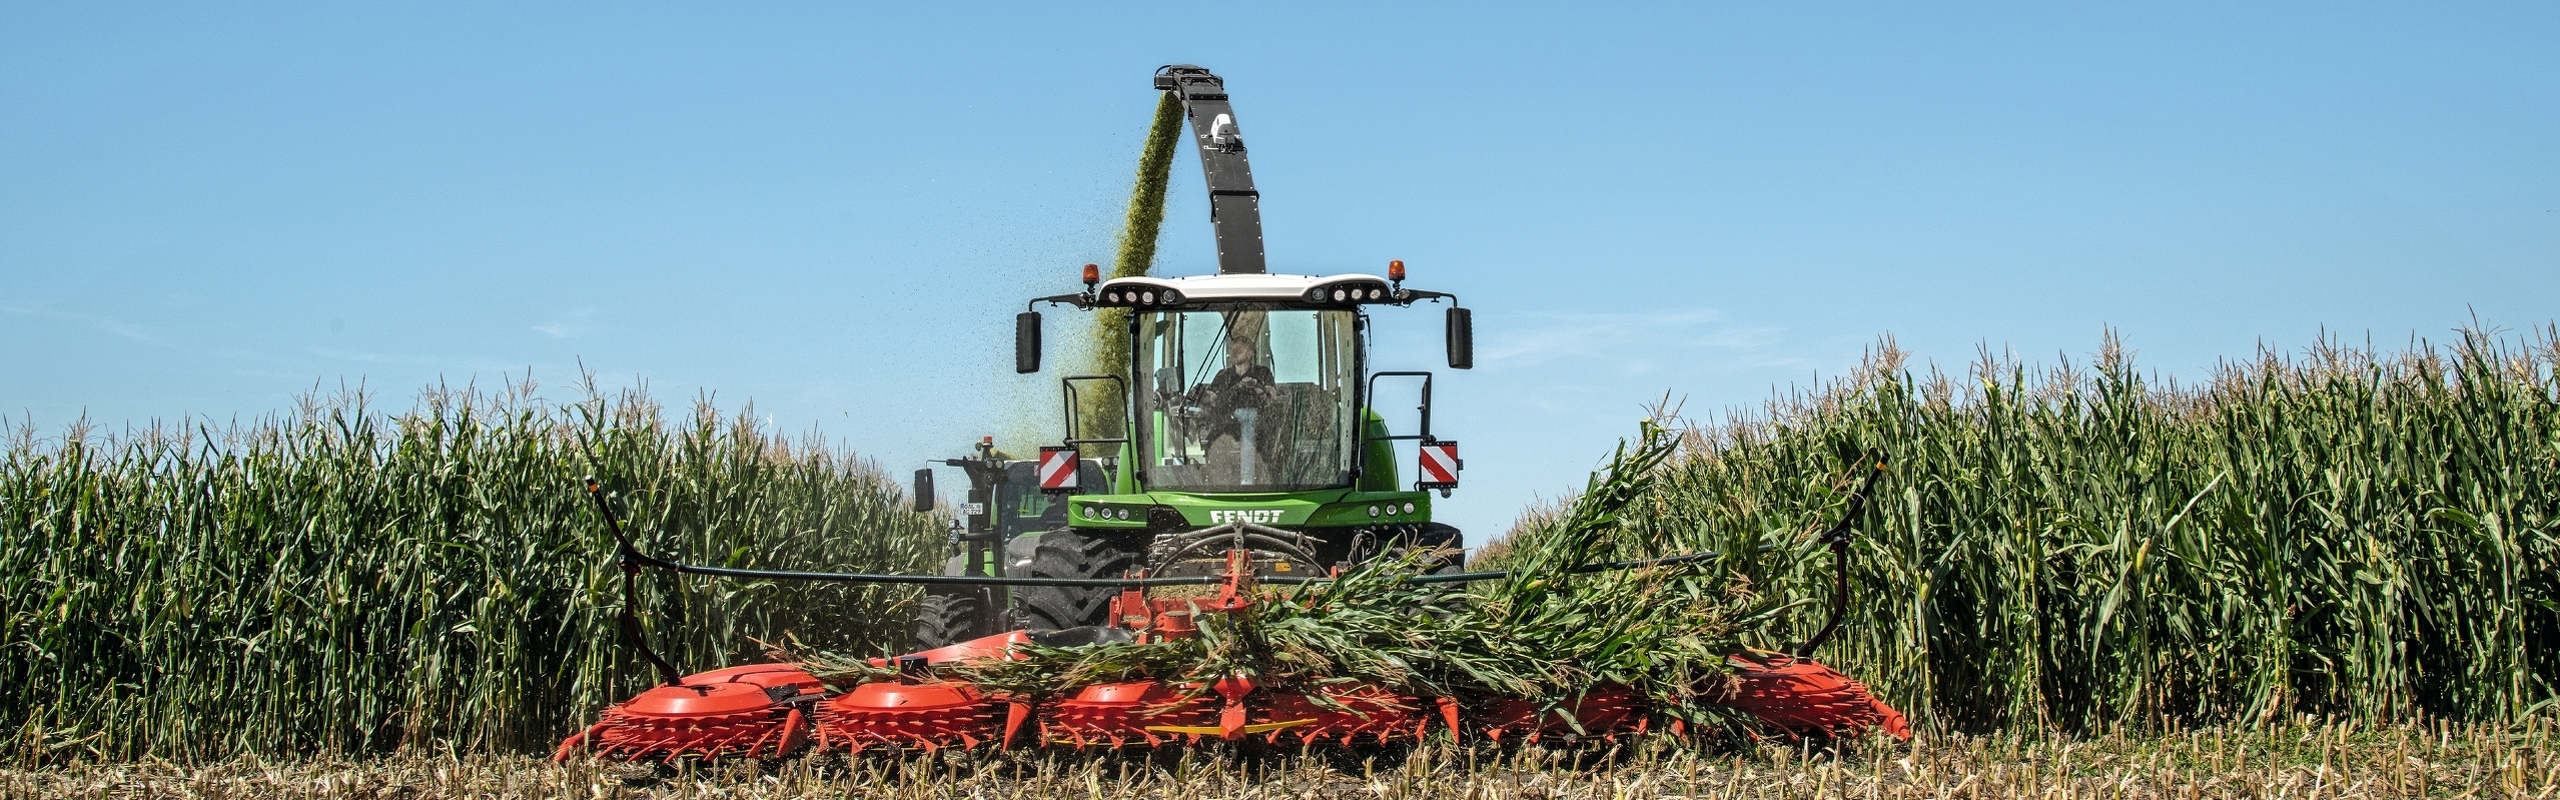 Fendt Katana in use in the maize field